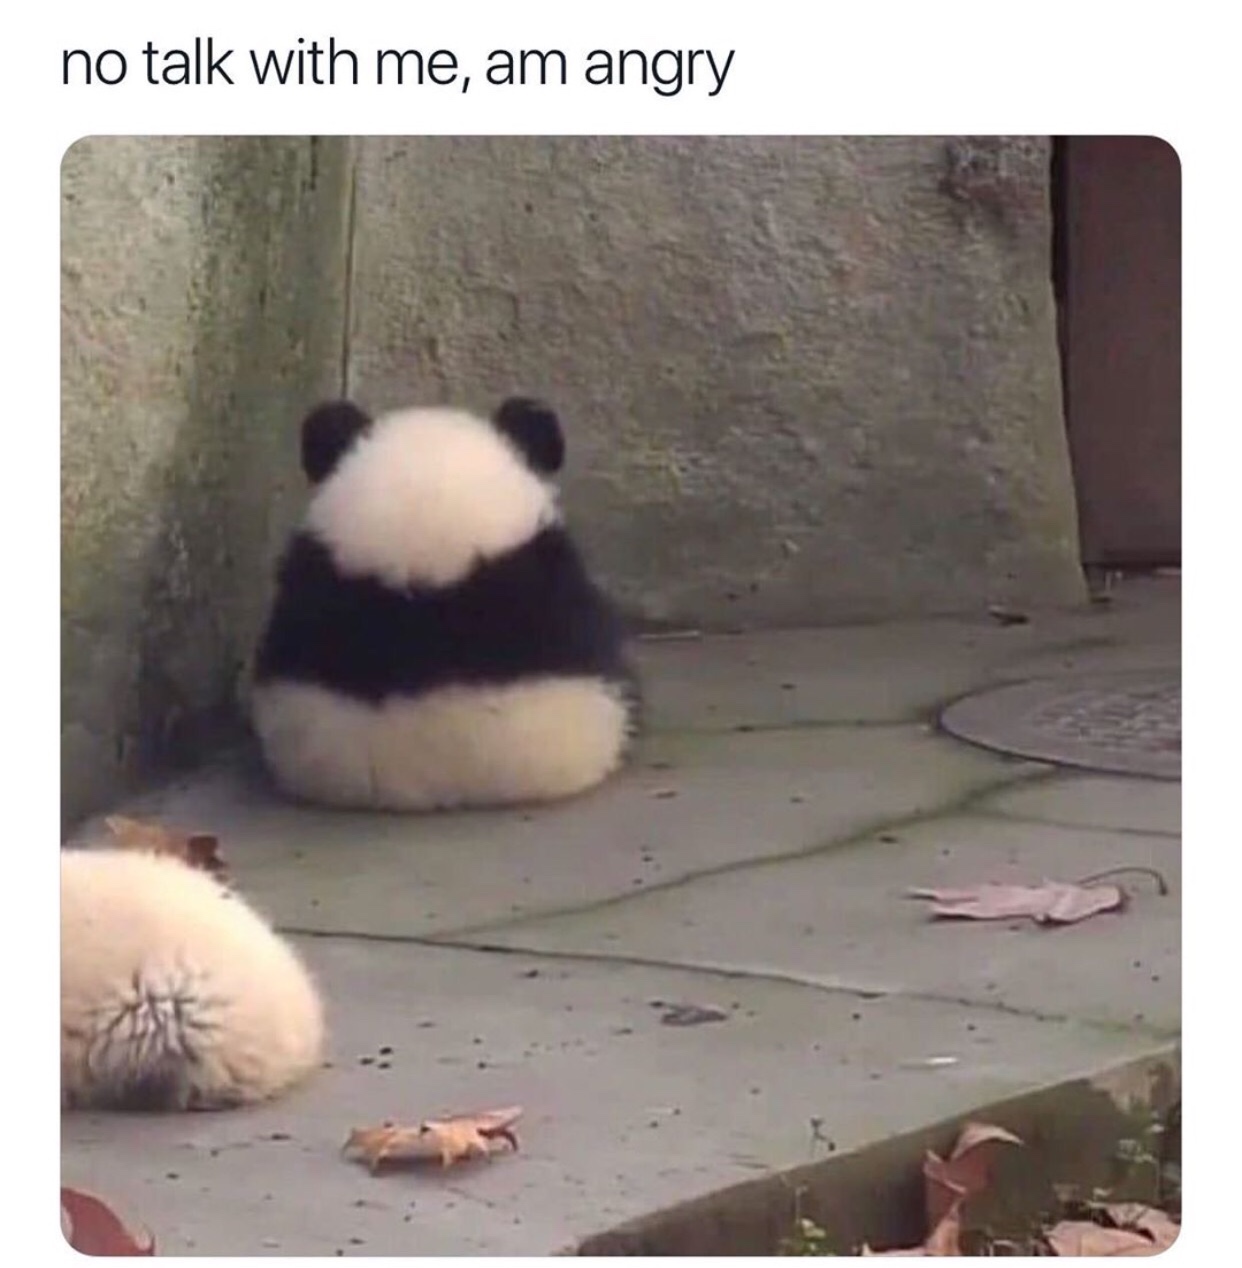 no talk to me am angry - no talk with me, am angry